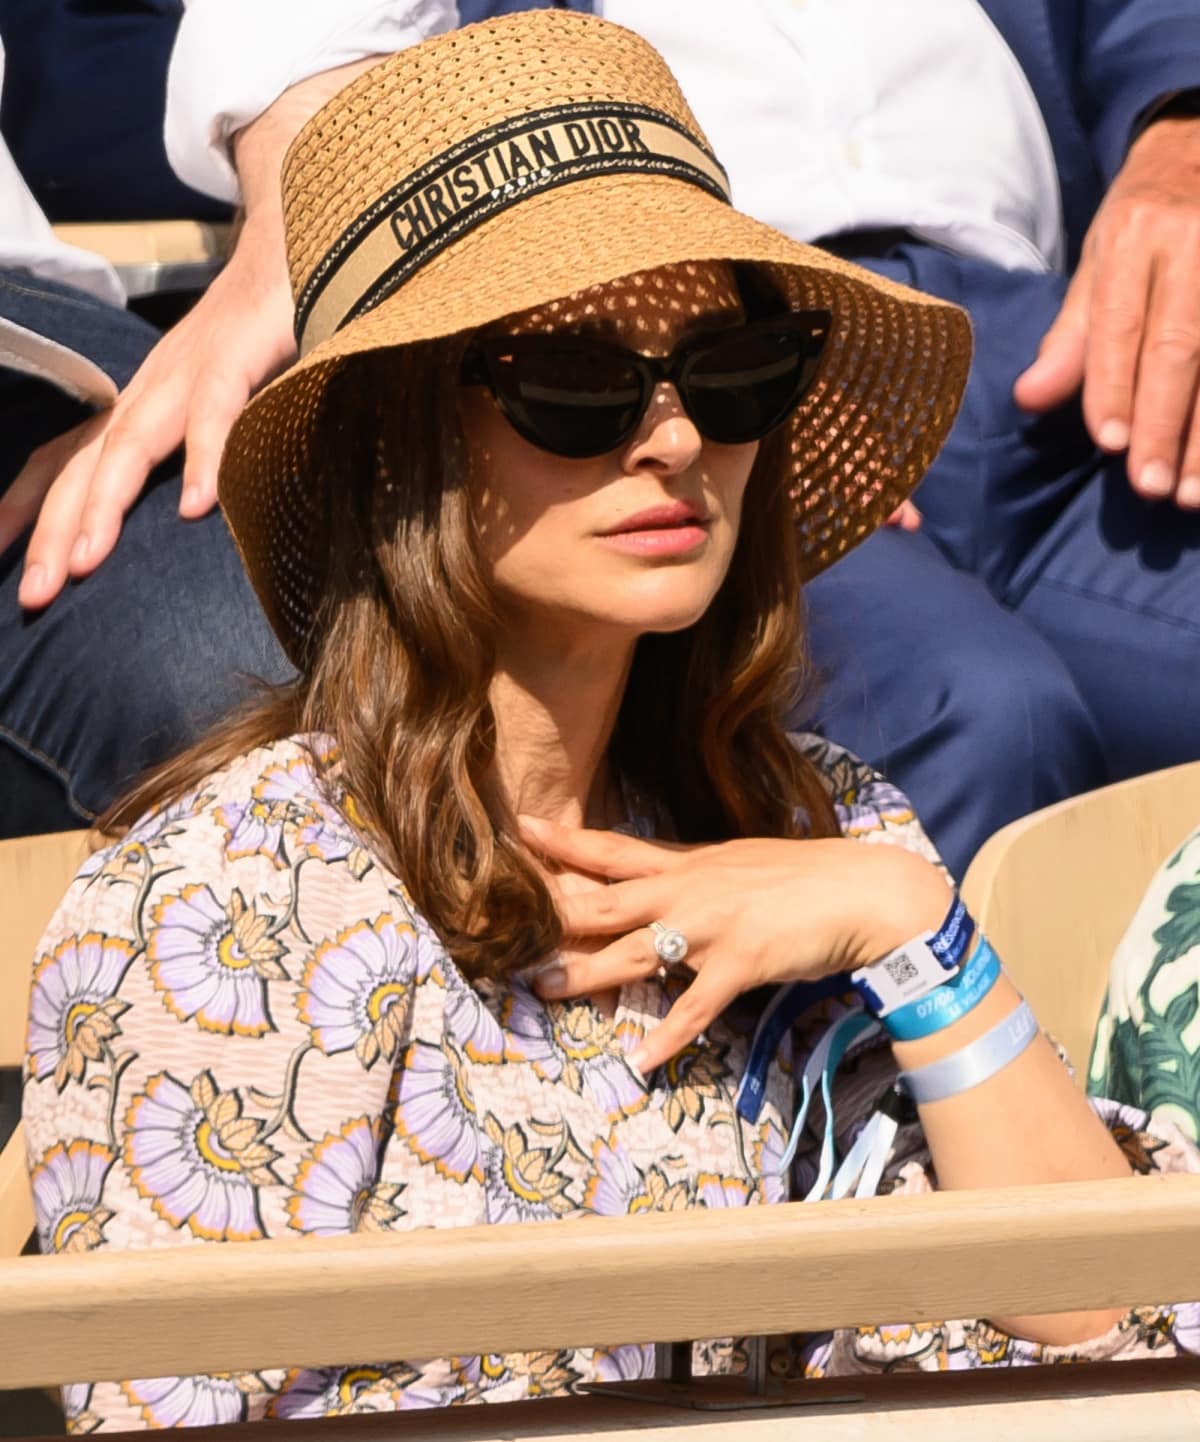 Natalie Portman was spotted flashing her engagement ring and wedding band at the French Open